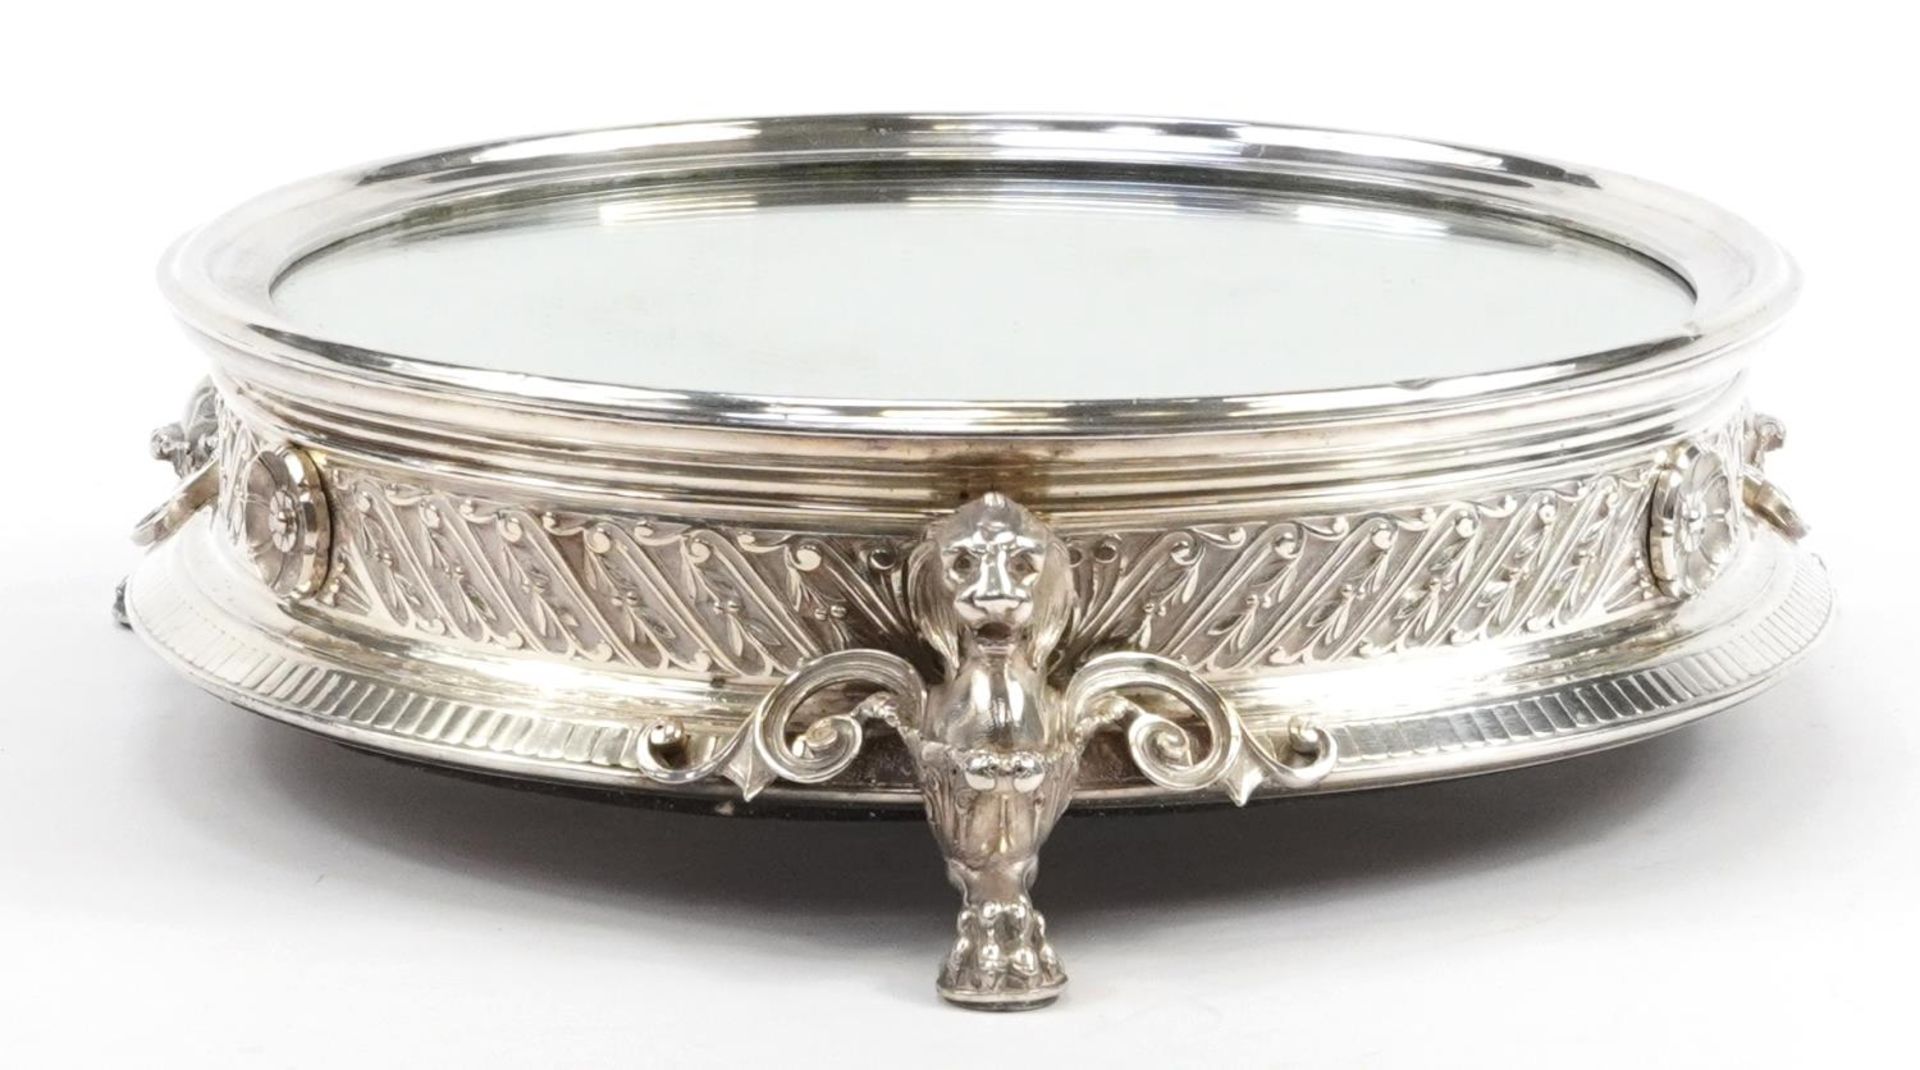 Elkington & Co, good Victorian silver plated mirrored cake stand with three lion design supports - Image 3 of 7